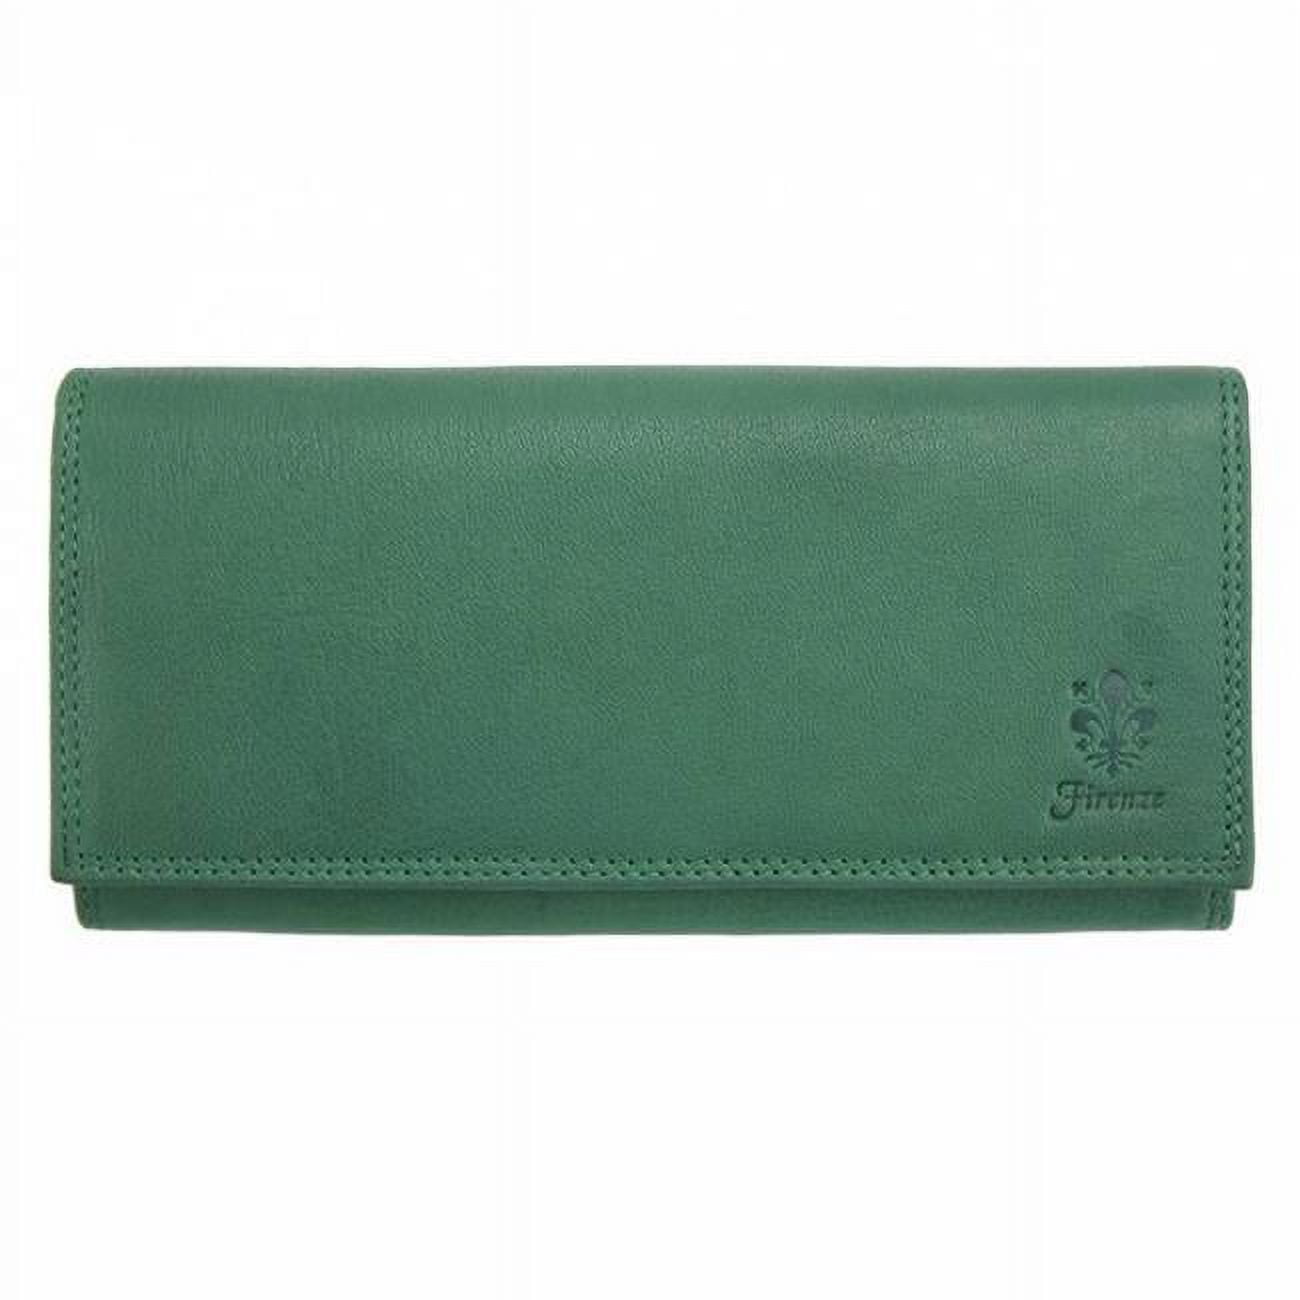 Emily Womens Luxury Wallet in Calfskin Leather, Turquoise 